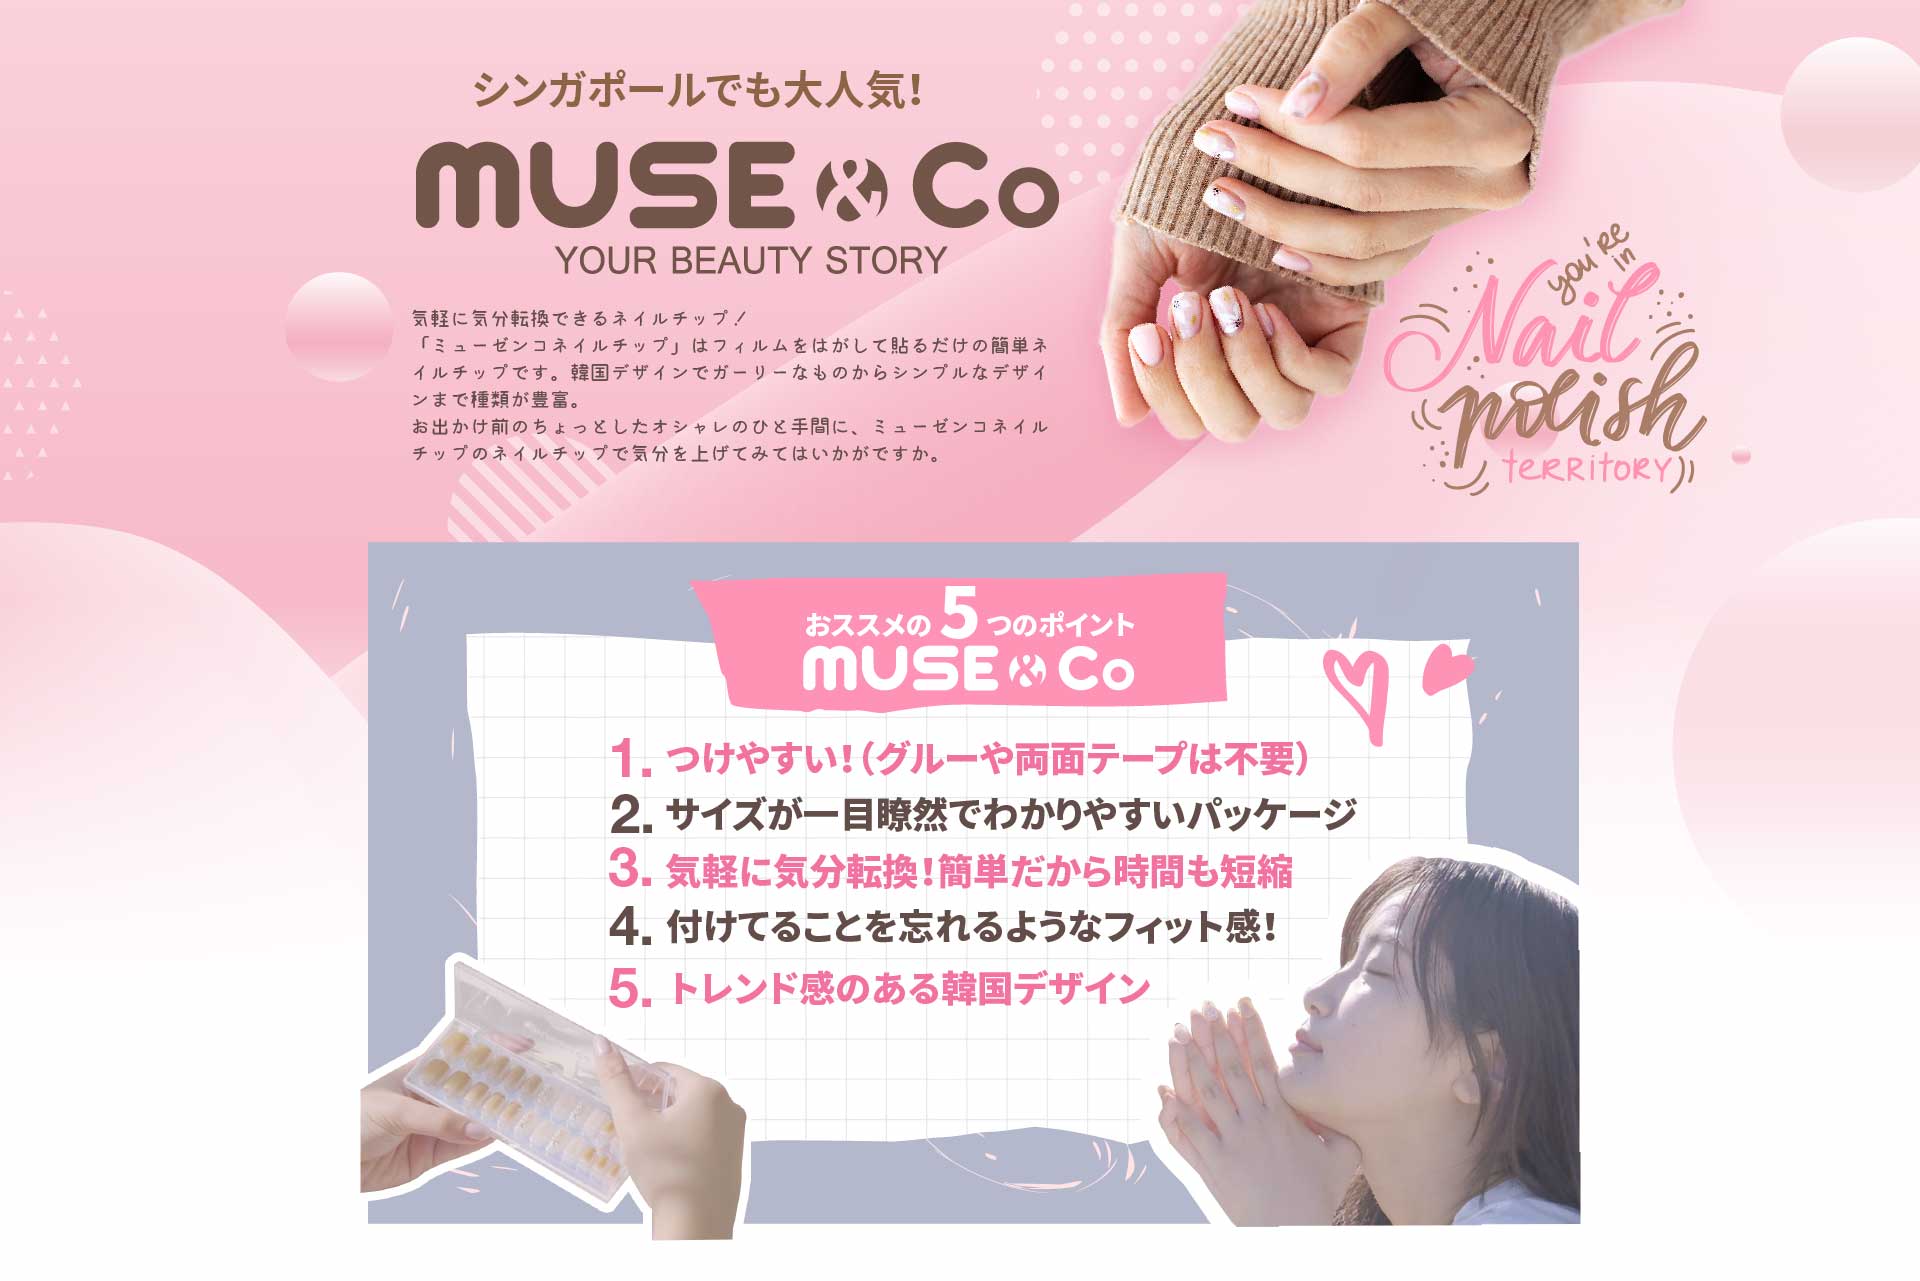 muse&co